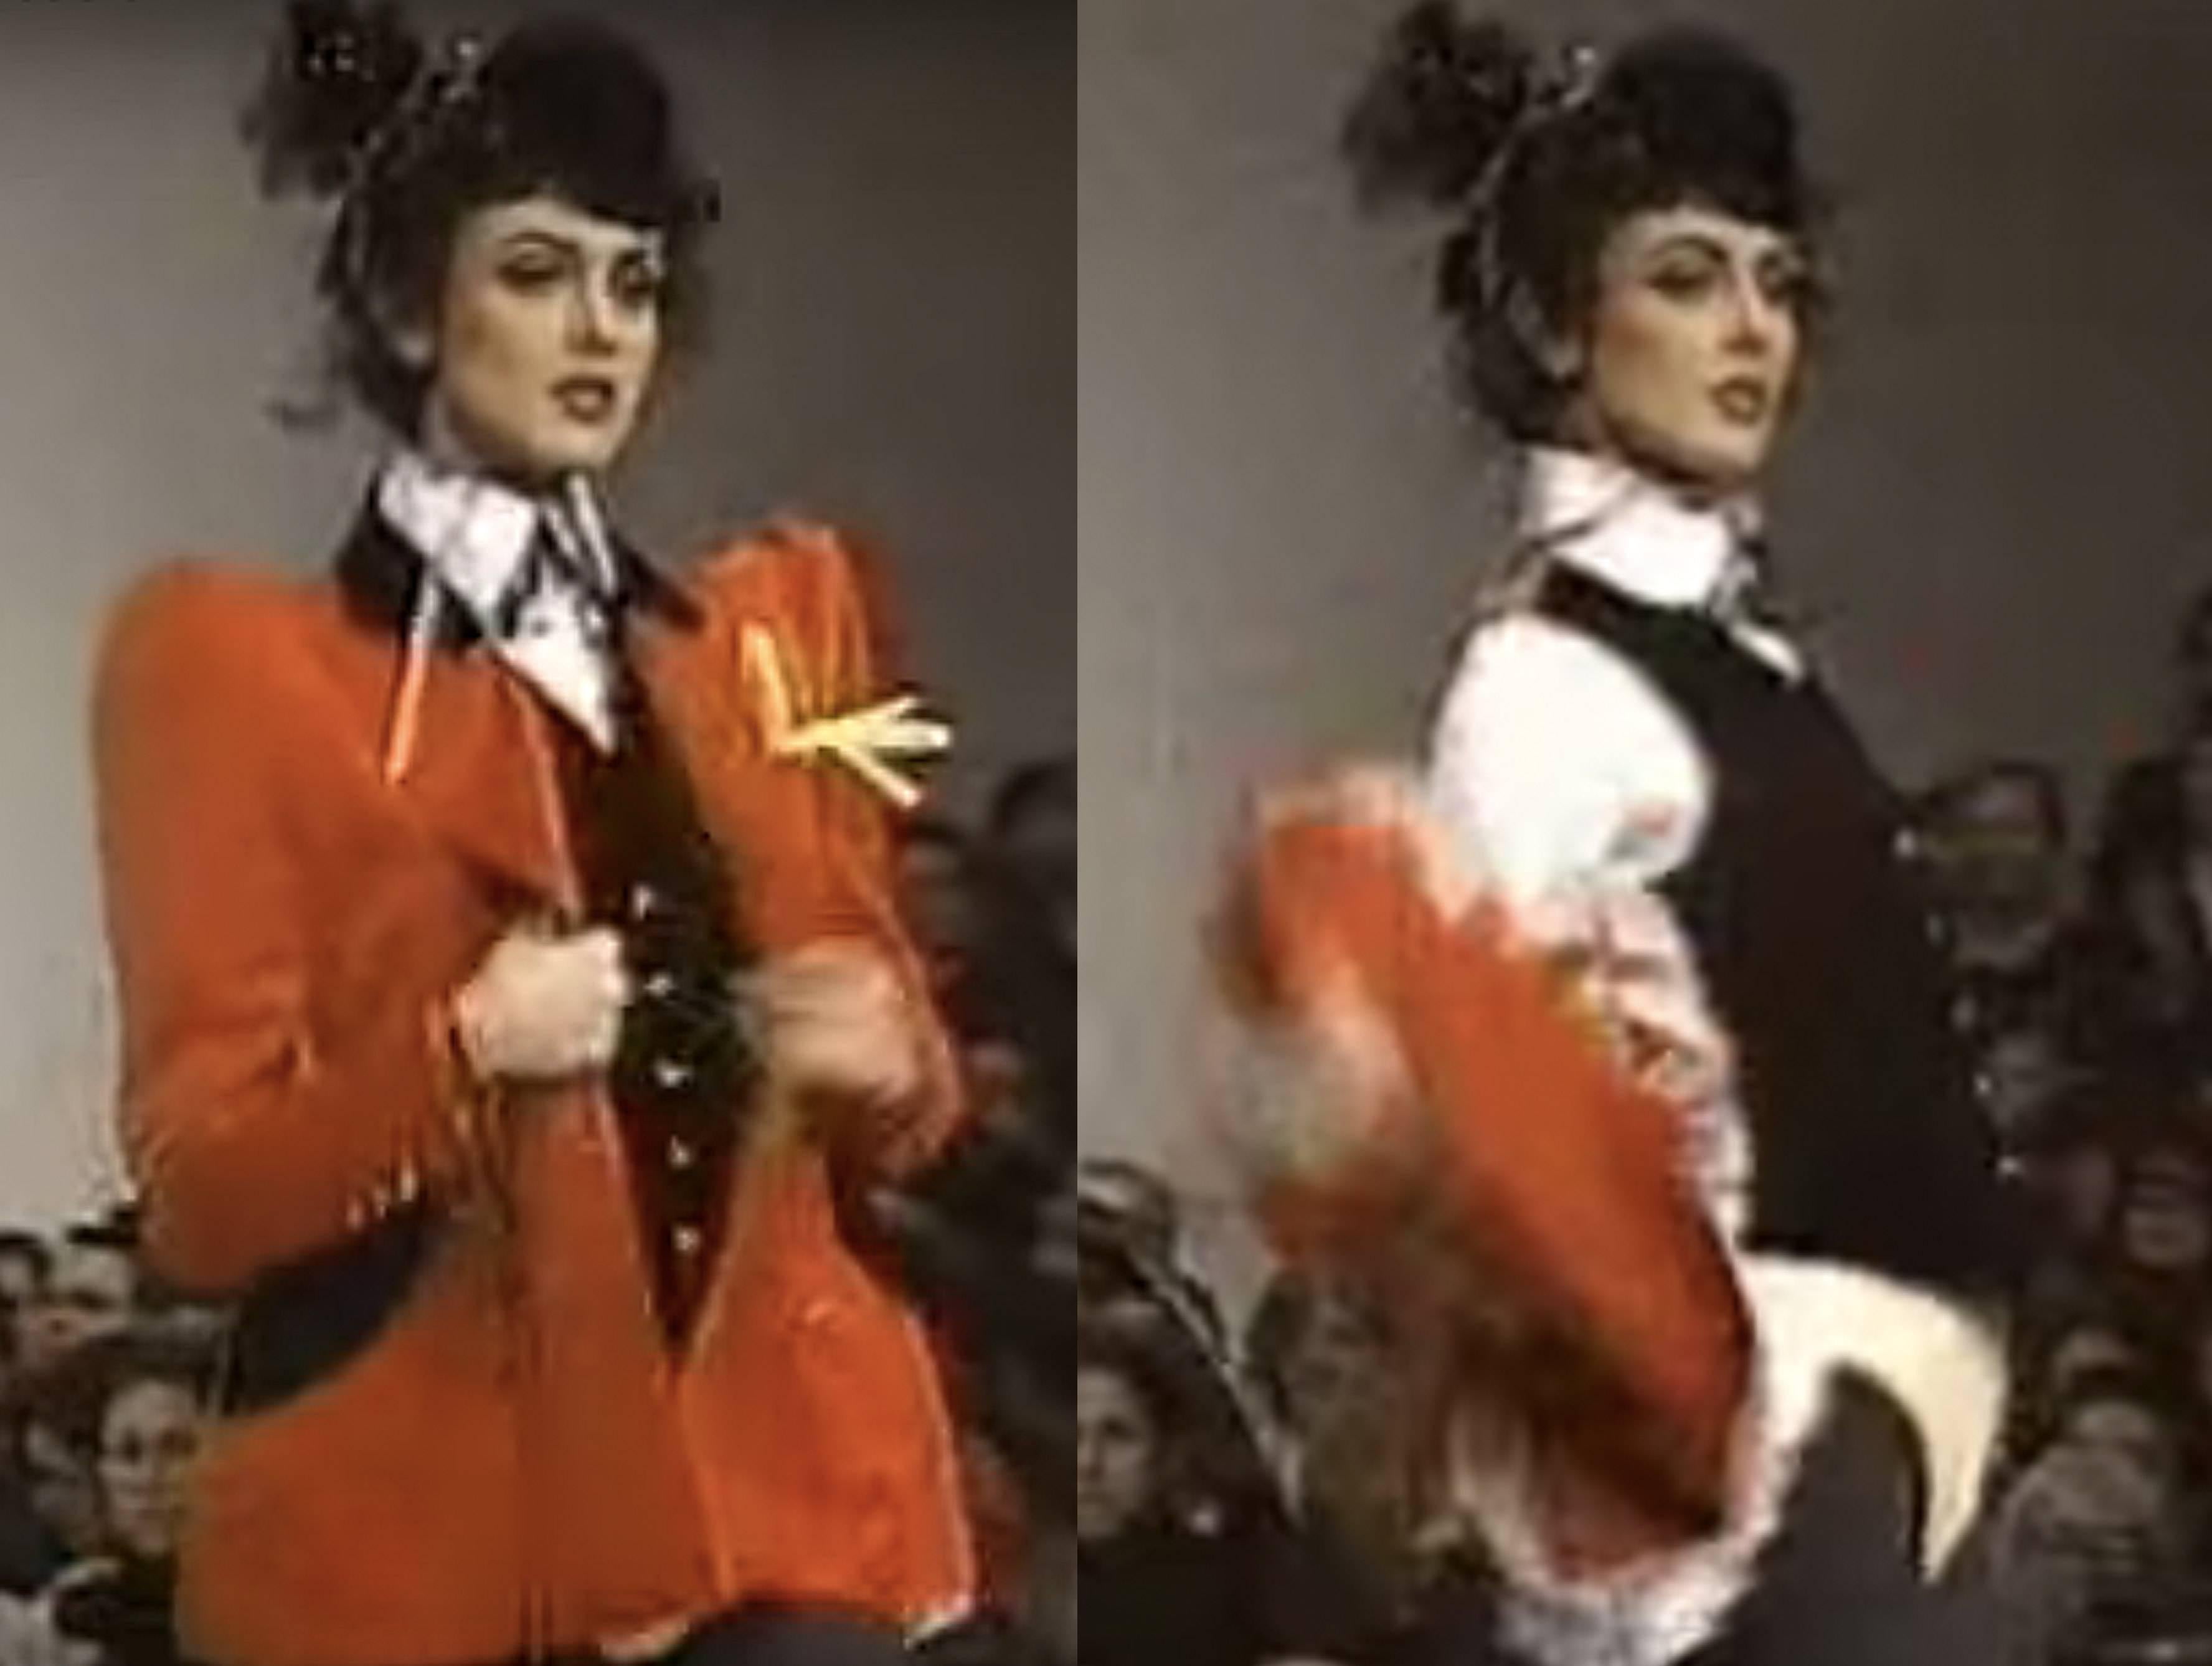 A rare Vivienne Westwood riding suit from the Autumn/Winter 1994 'On Liberty' collection. The suit features a tailored red blazer with puff shoulders, black velvet lapels and pockets, black velvet pants, black velvet waistcoat, white cotton shirt